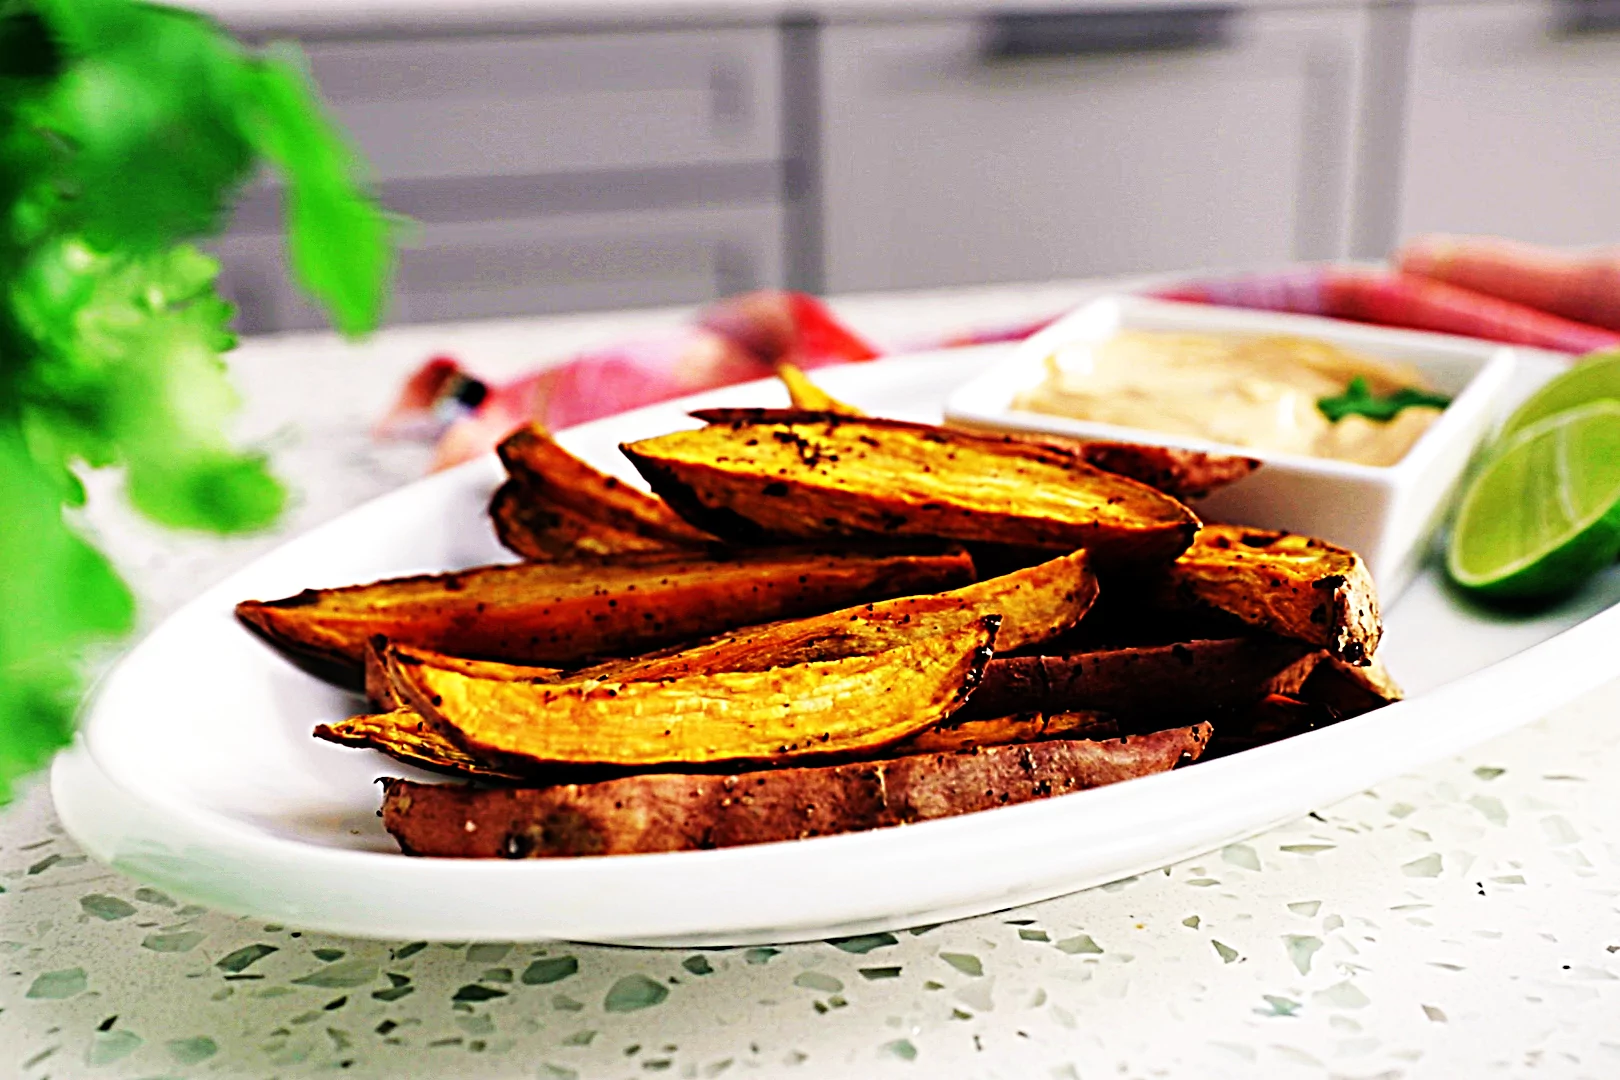 Stupid-Easy Recipe for Roasted Sweet Potato Fries with Chipotle Aioli (#1 Top-Rated)